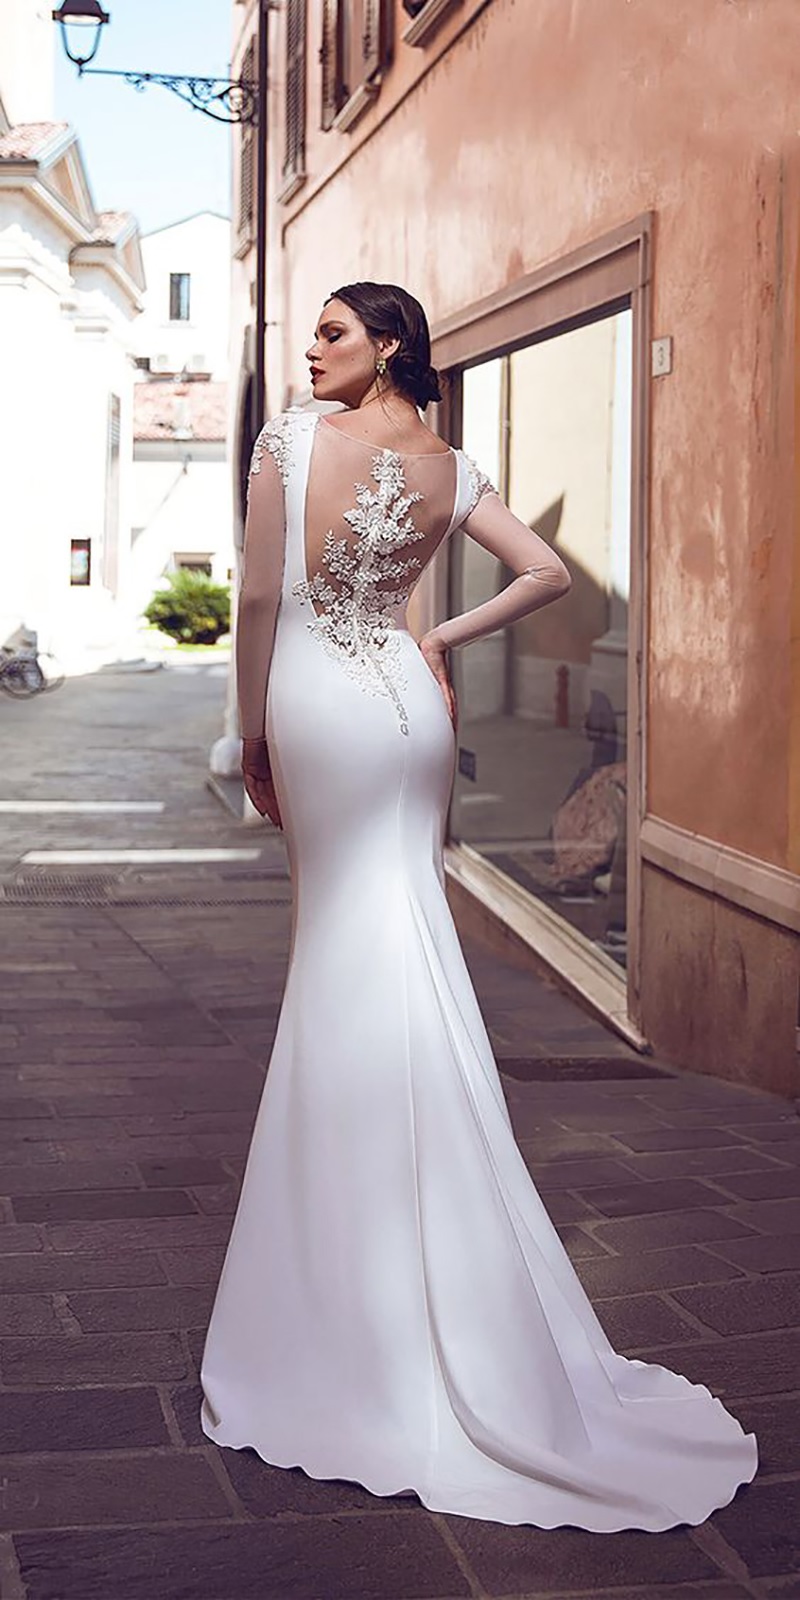 White Long Sleeves Wedding Dress Evelyn Belluci - Brida Gowns